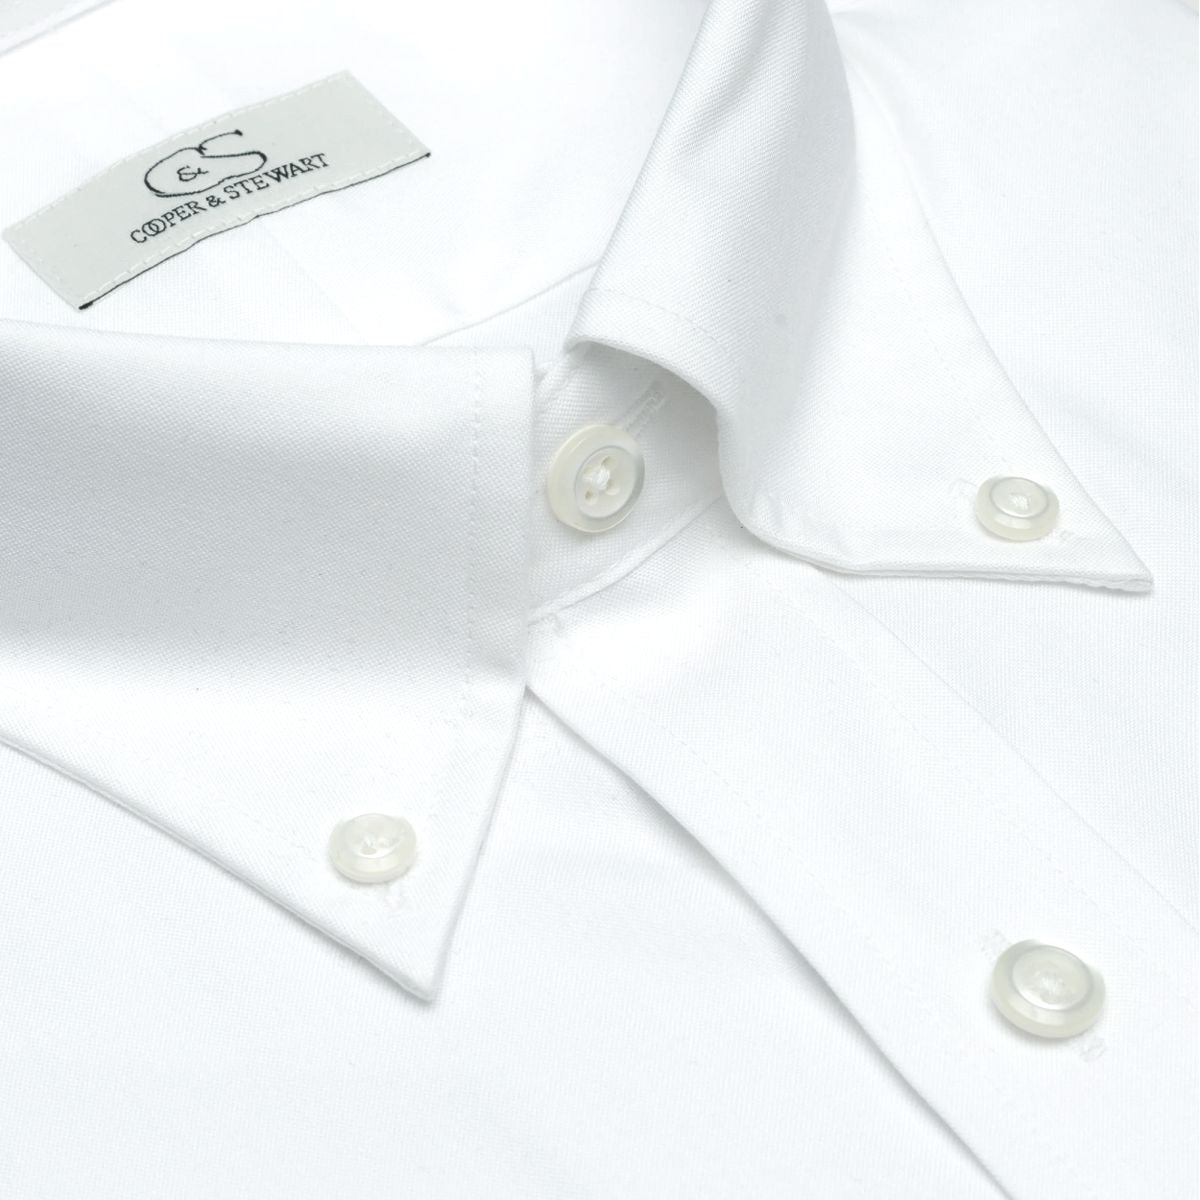 White Stretch Cotton Wrinkle-Free Pinpoint Oxford Cotton Dress Shirt with Button-Down Collar by Cooper & Stewart